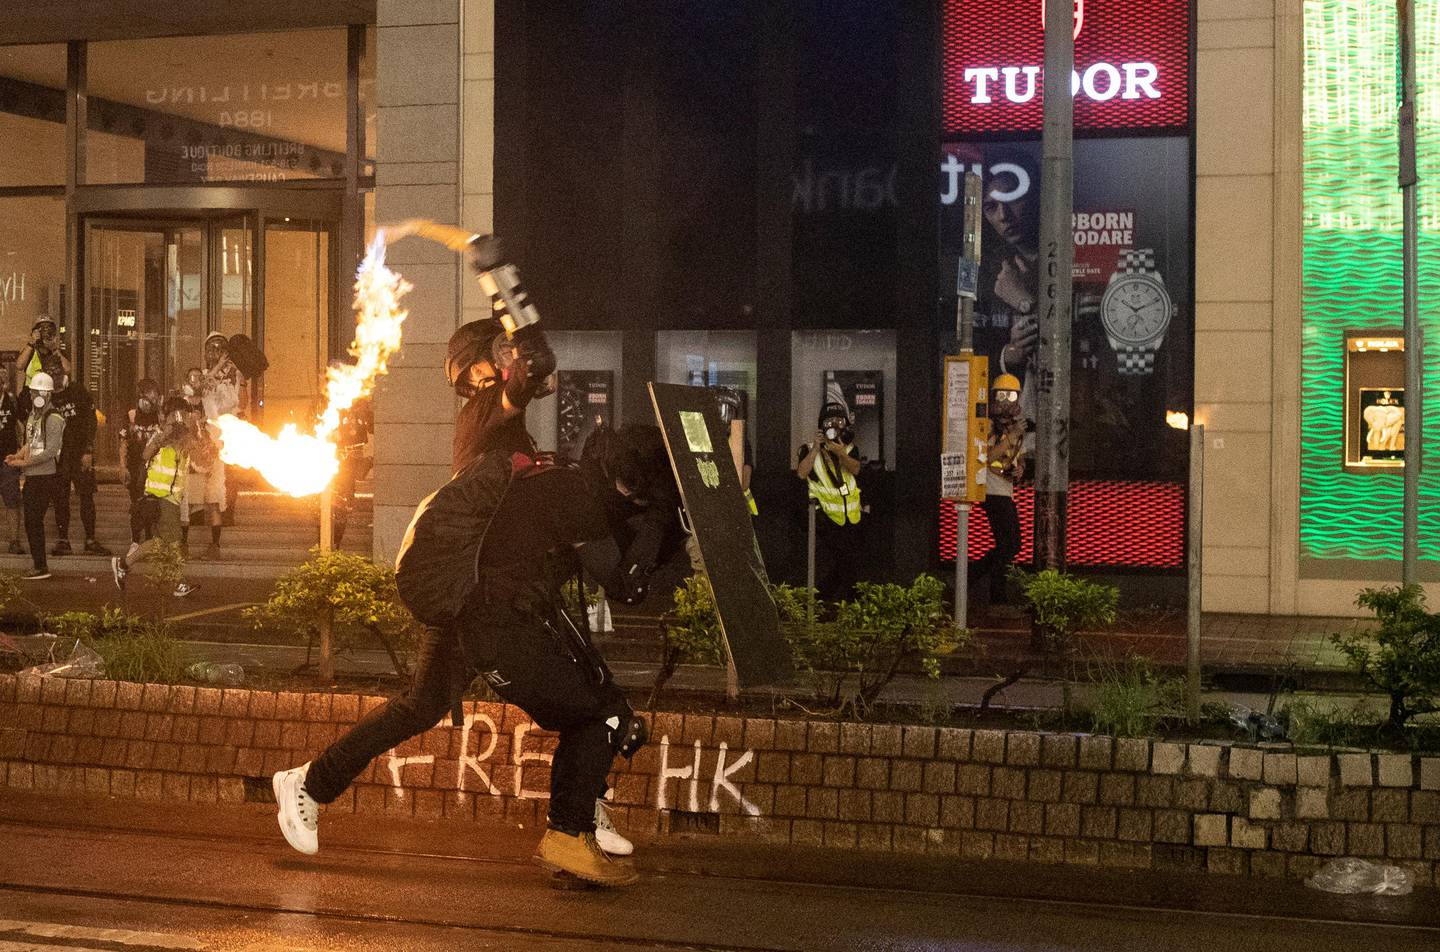 A demonstrator throws a molotov cocktail at police during a protest in Hong Kong, China August 31, 2019. REUTERS/Danish Siddiqui